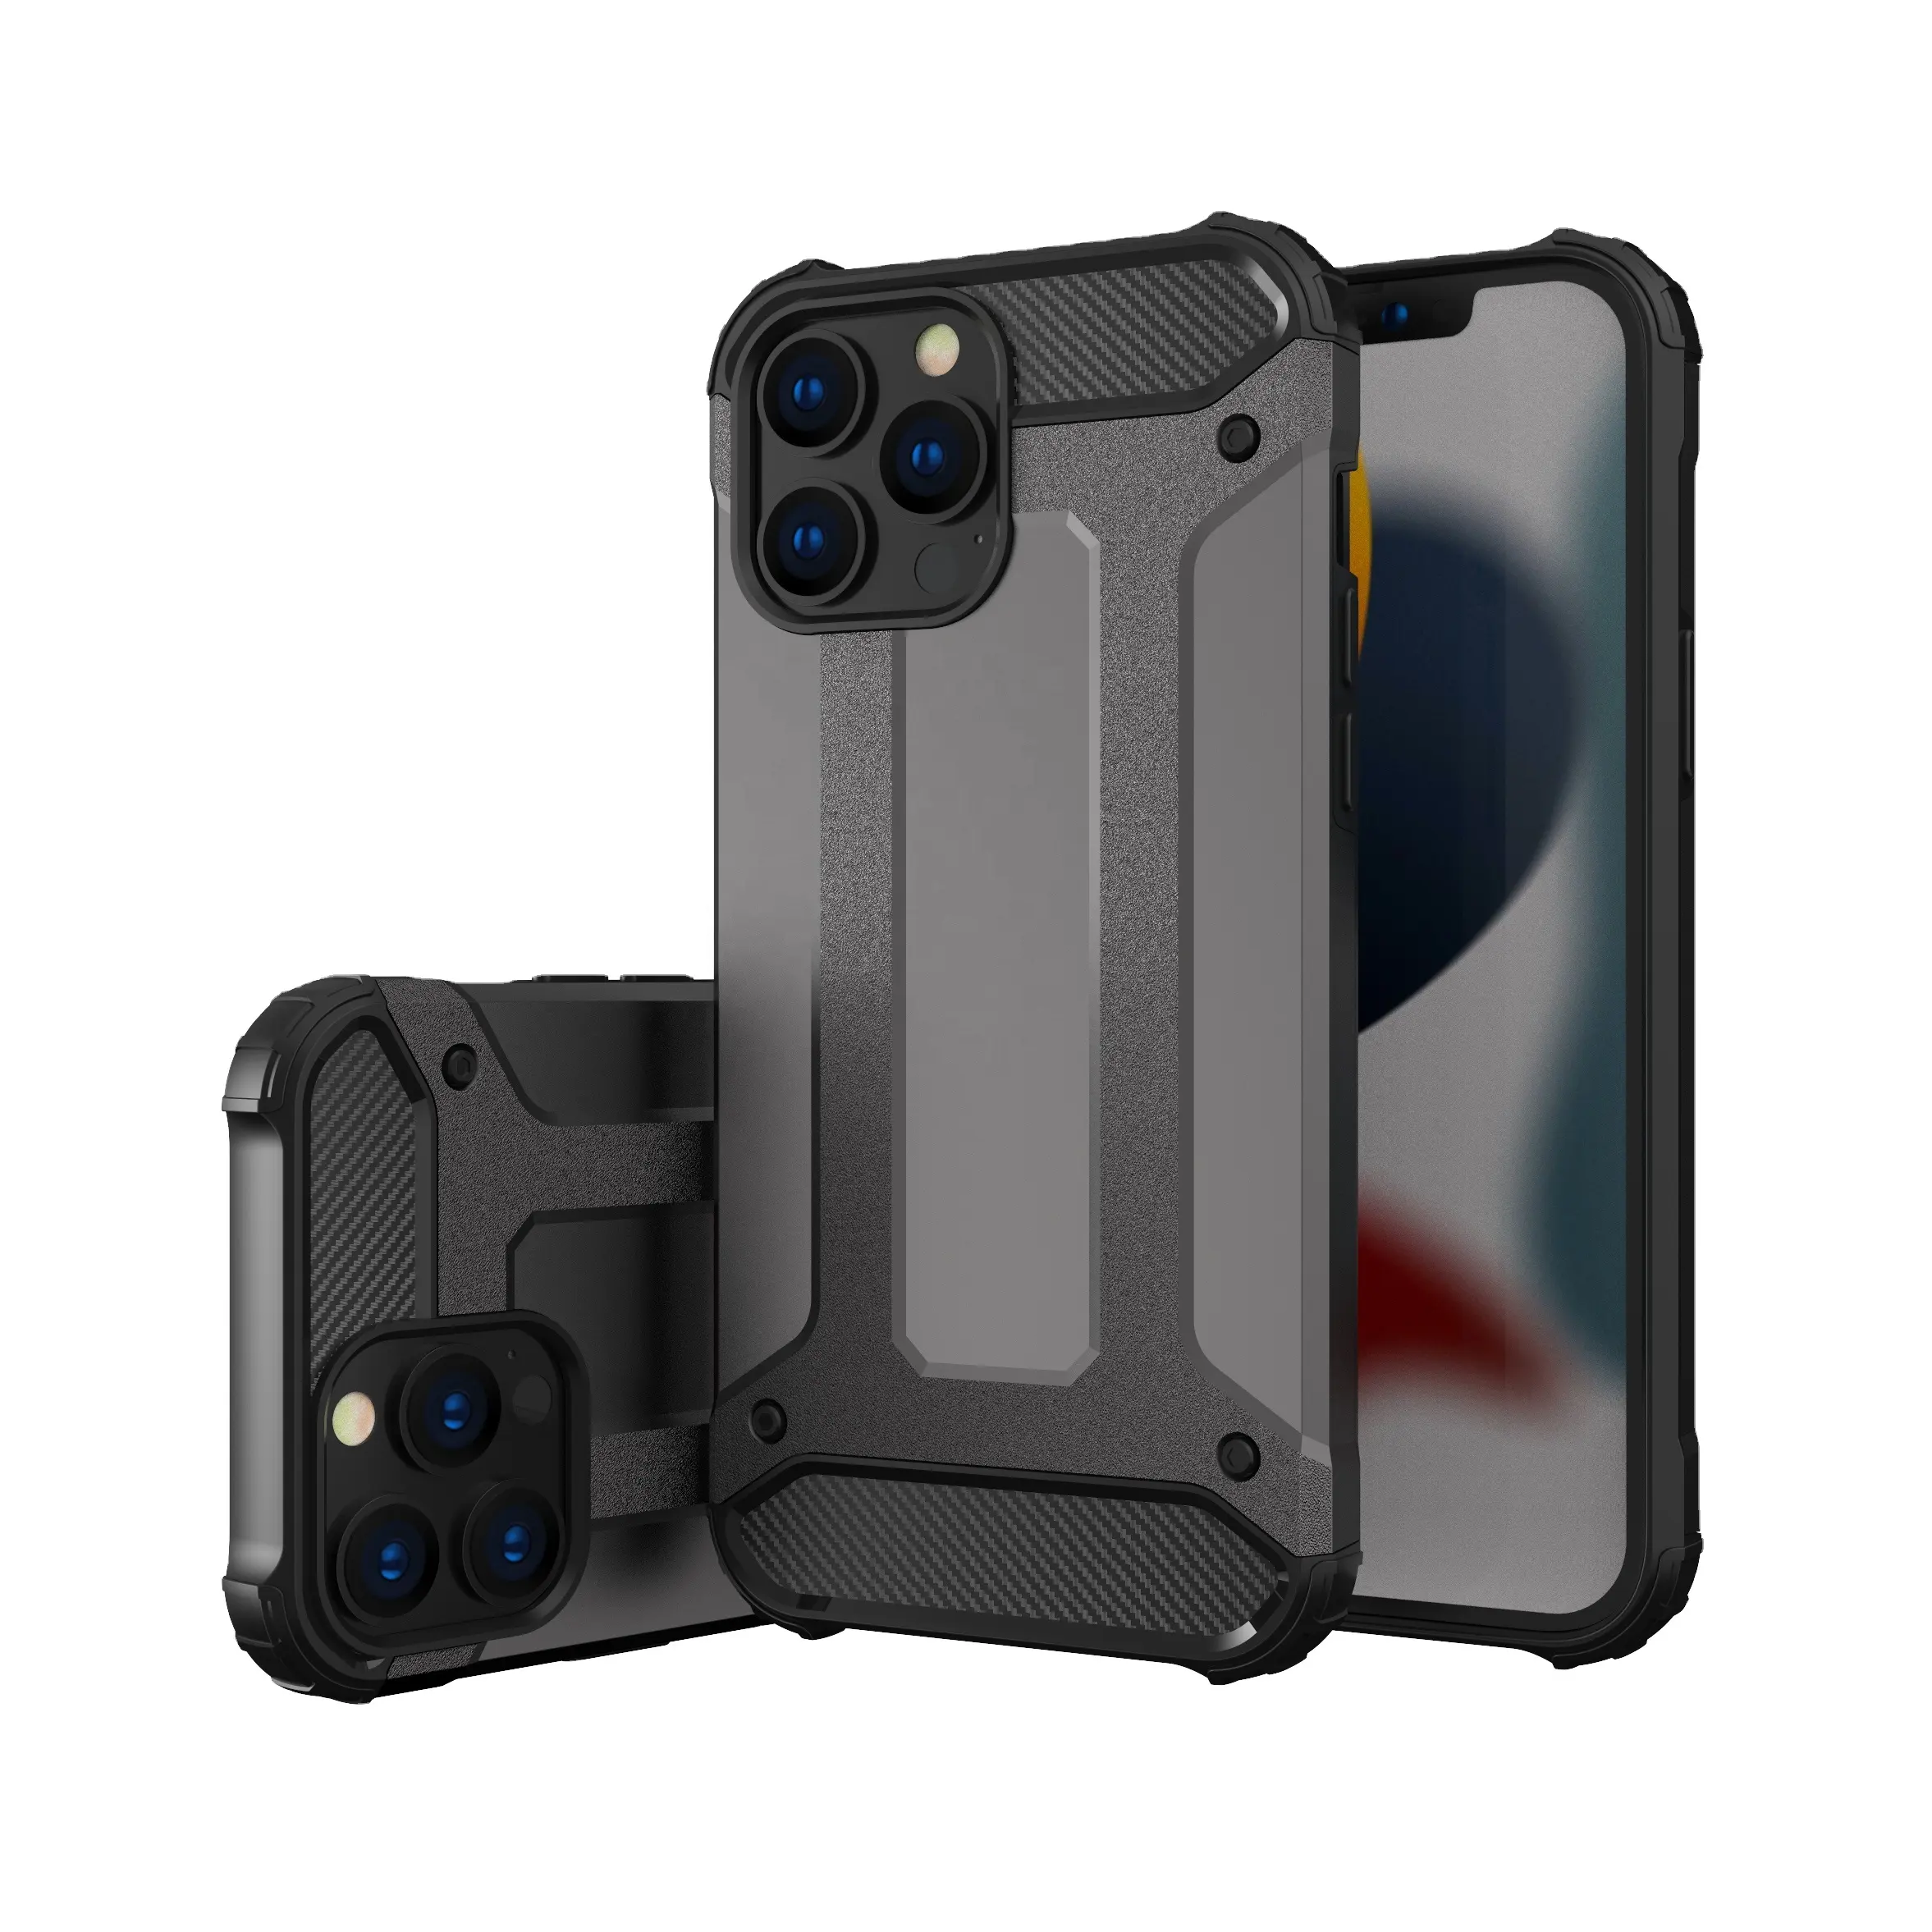 New Armor Design Phone case for iPhone 13 Pro Max Drop Tested Protection Cover for iPhone 13 Pro Case